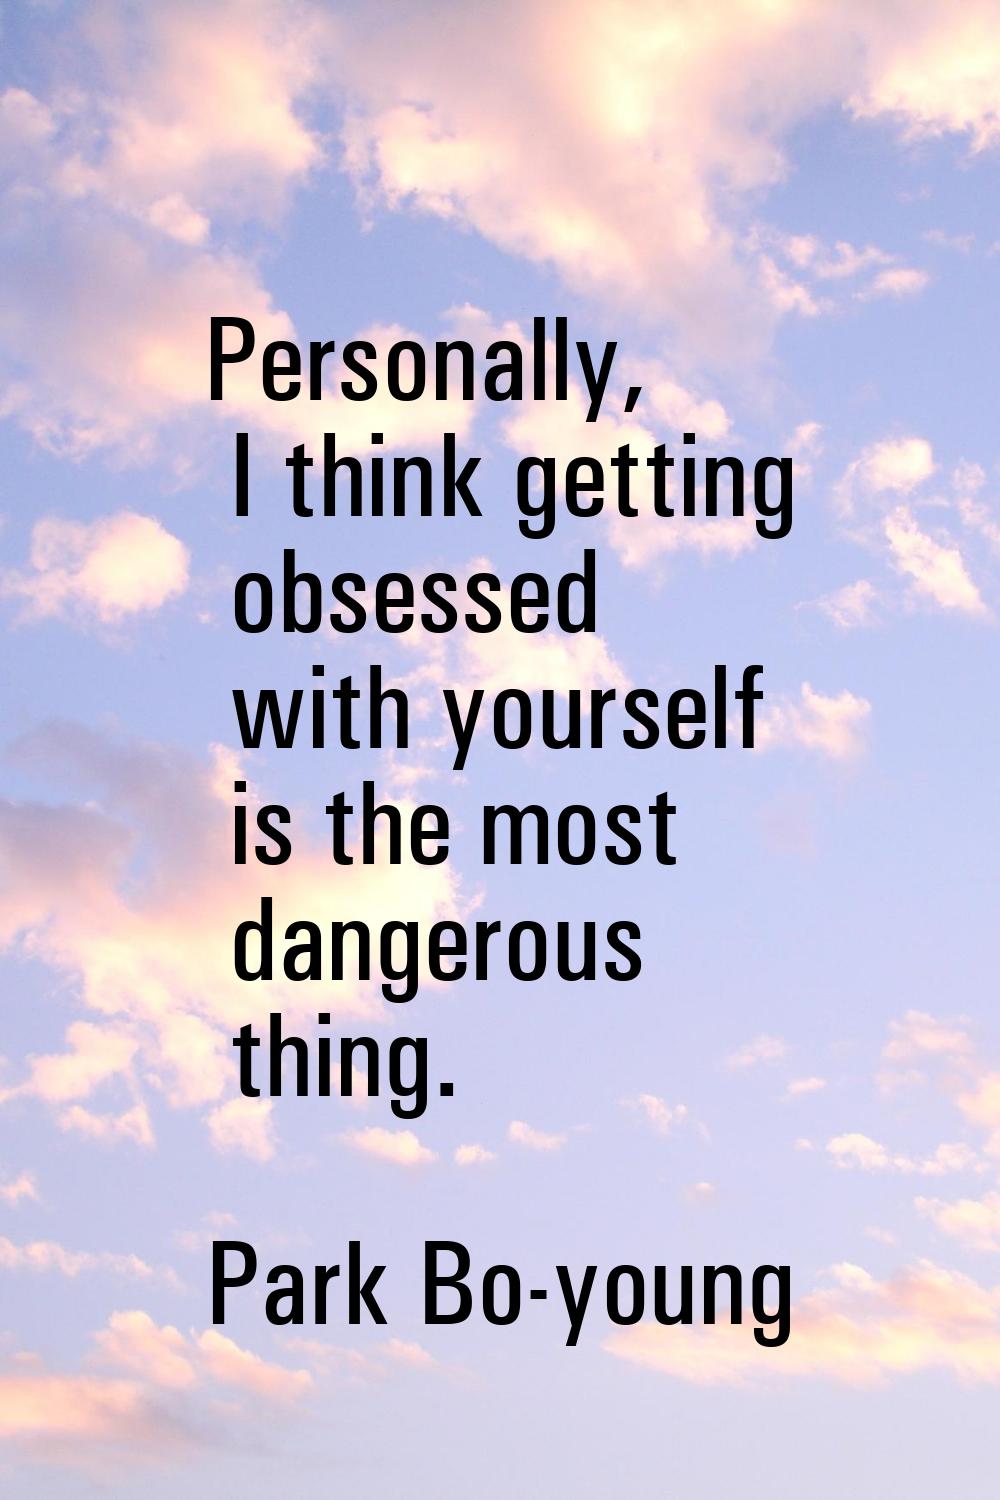 Personally, I think getting obsessed with yourself is the most dangerous thing.